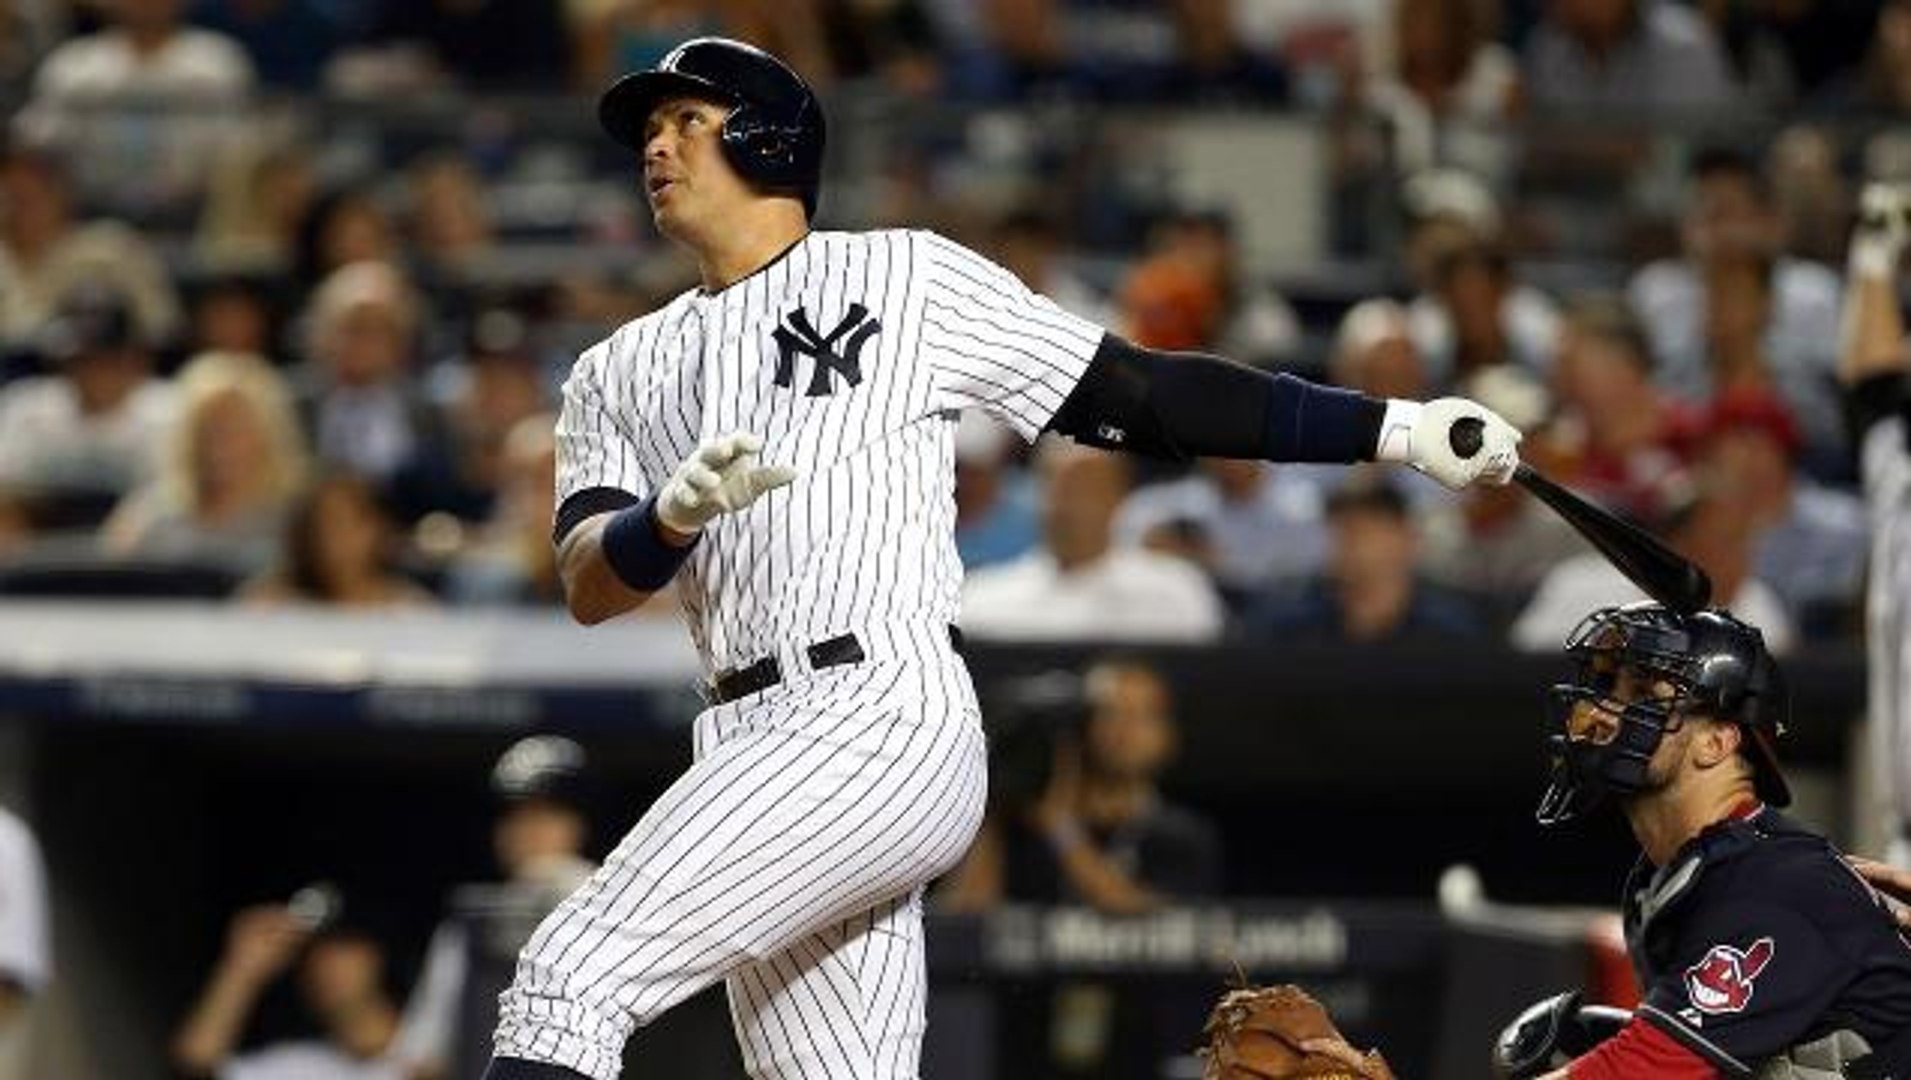 Looking back on Alex Rodriguez's career numbers - video Dailymotion